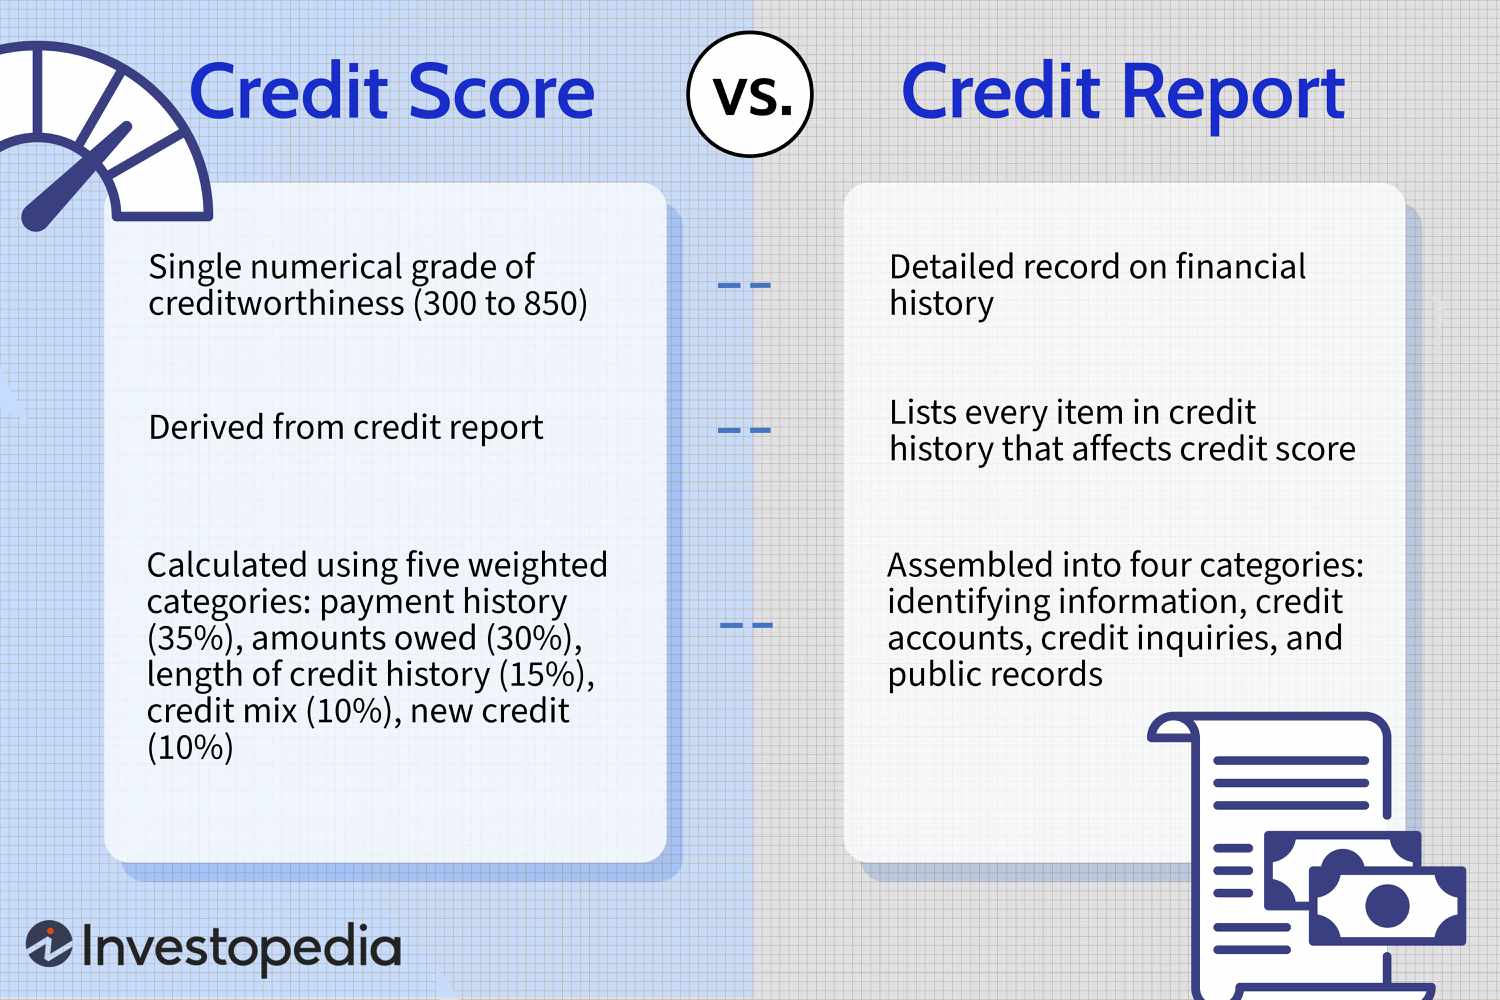 What Are Credit Scores And Reports?